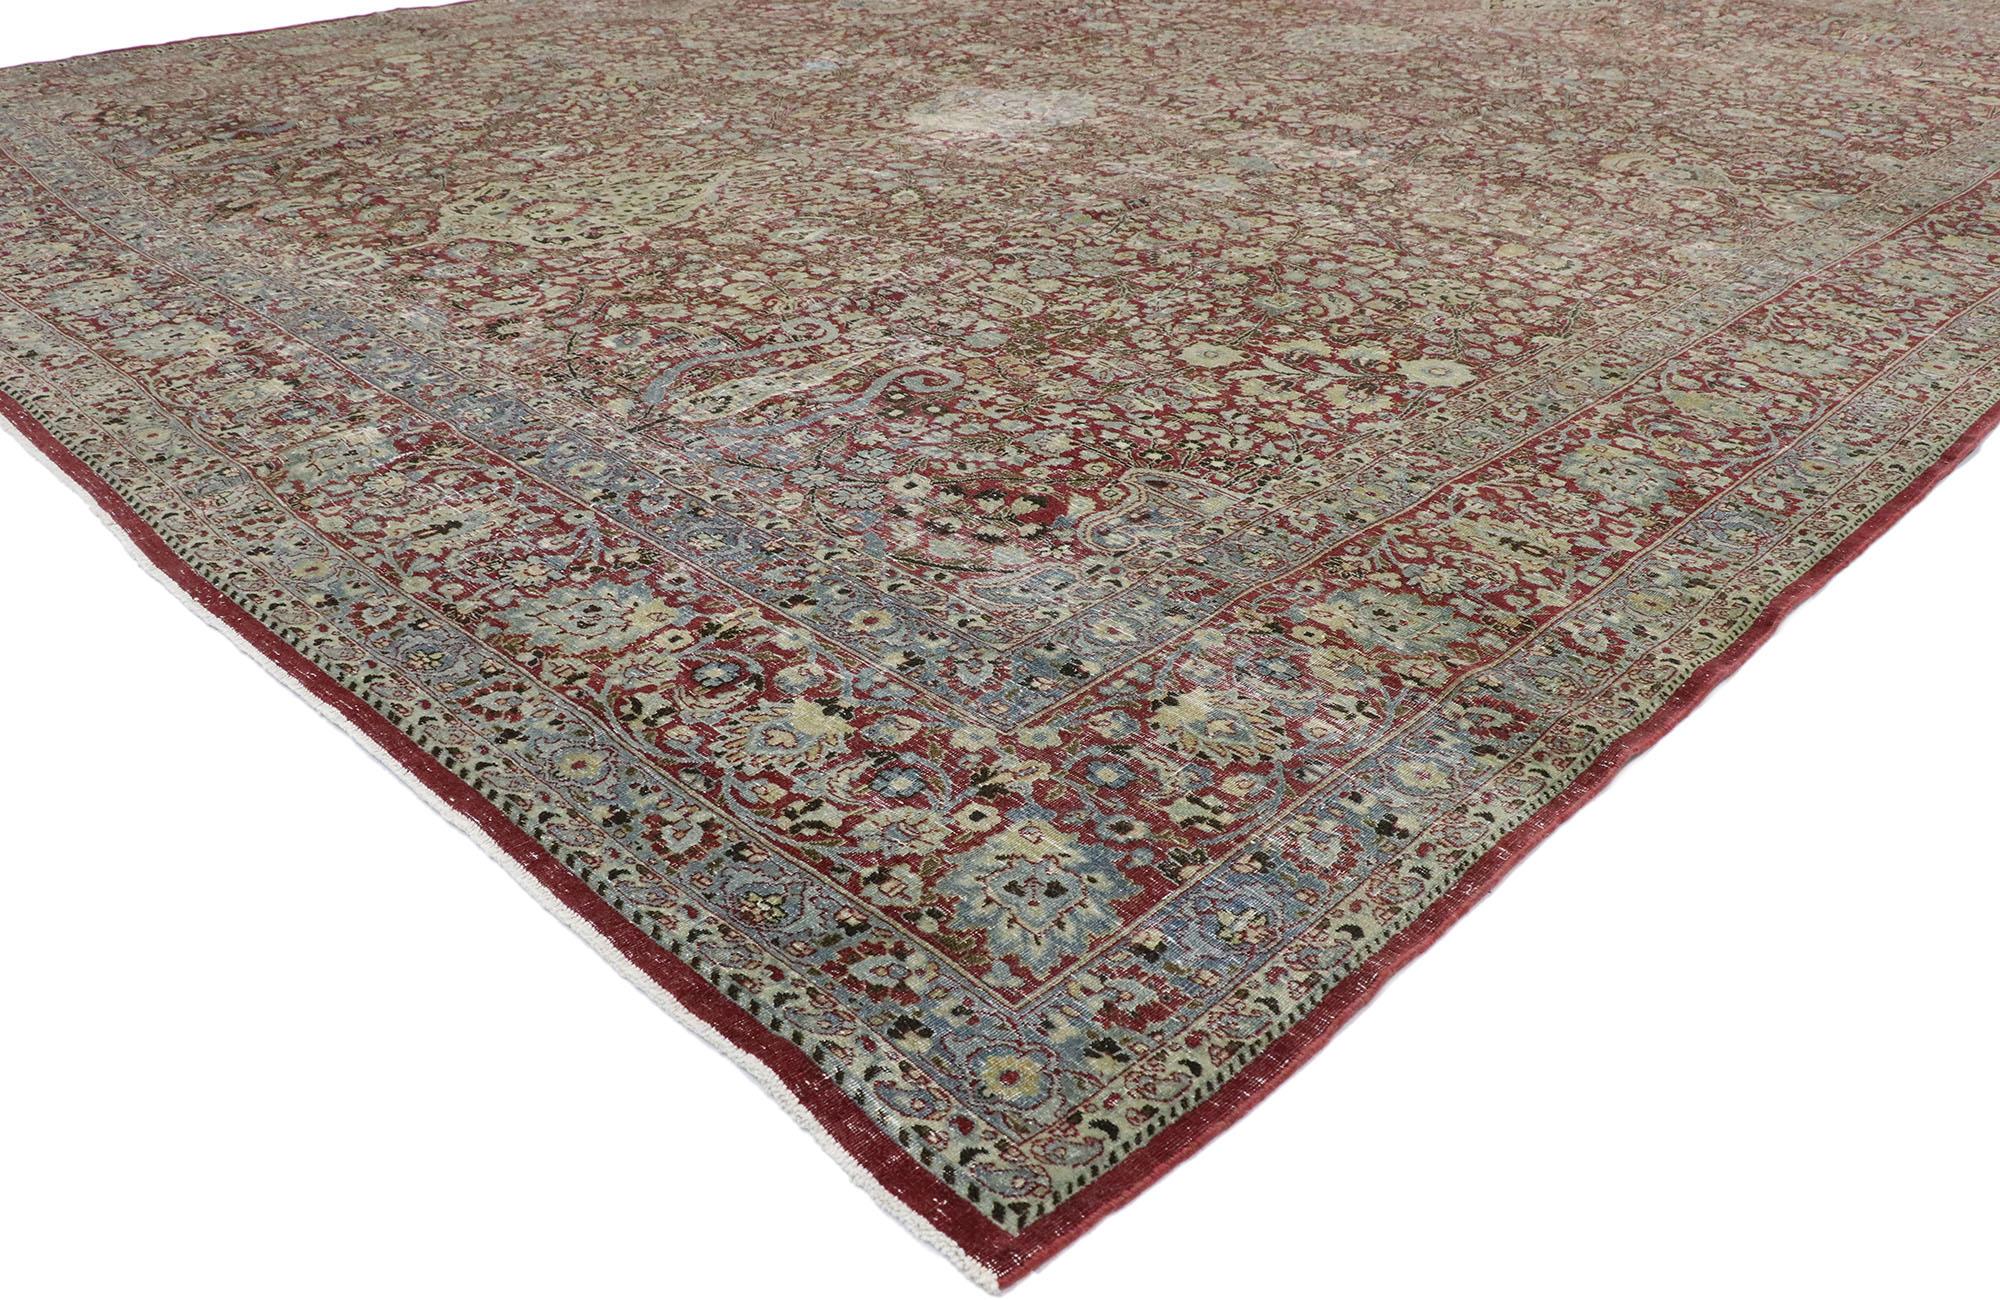 51527 Distressed Antique Persian Kerman Rug 11'09 x 16'03. With its rugged beauty and rustic sensibility, this hand-knotted wool distressed antique Persian Kerman rug will take on a curated lived-in look that feels timeless while imparting a sense